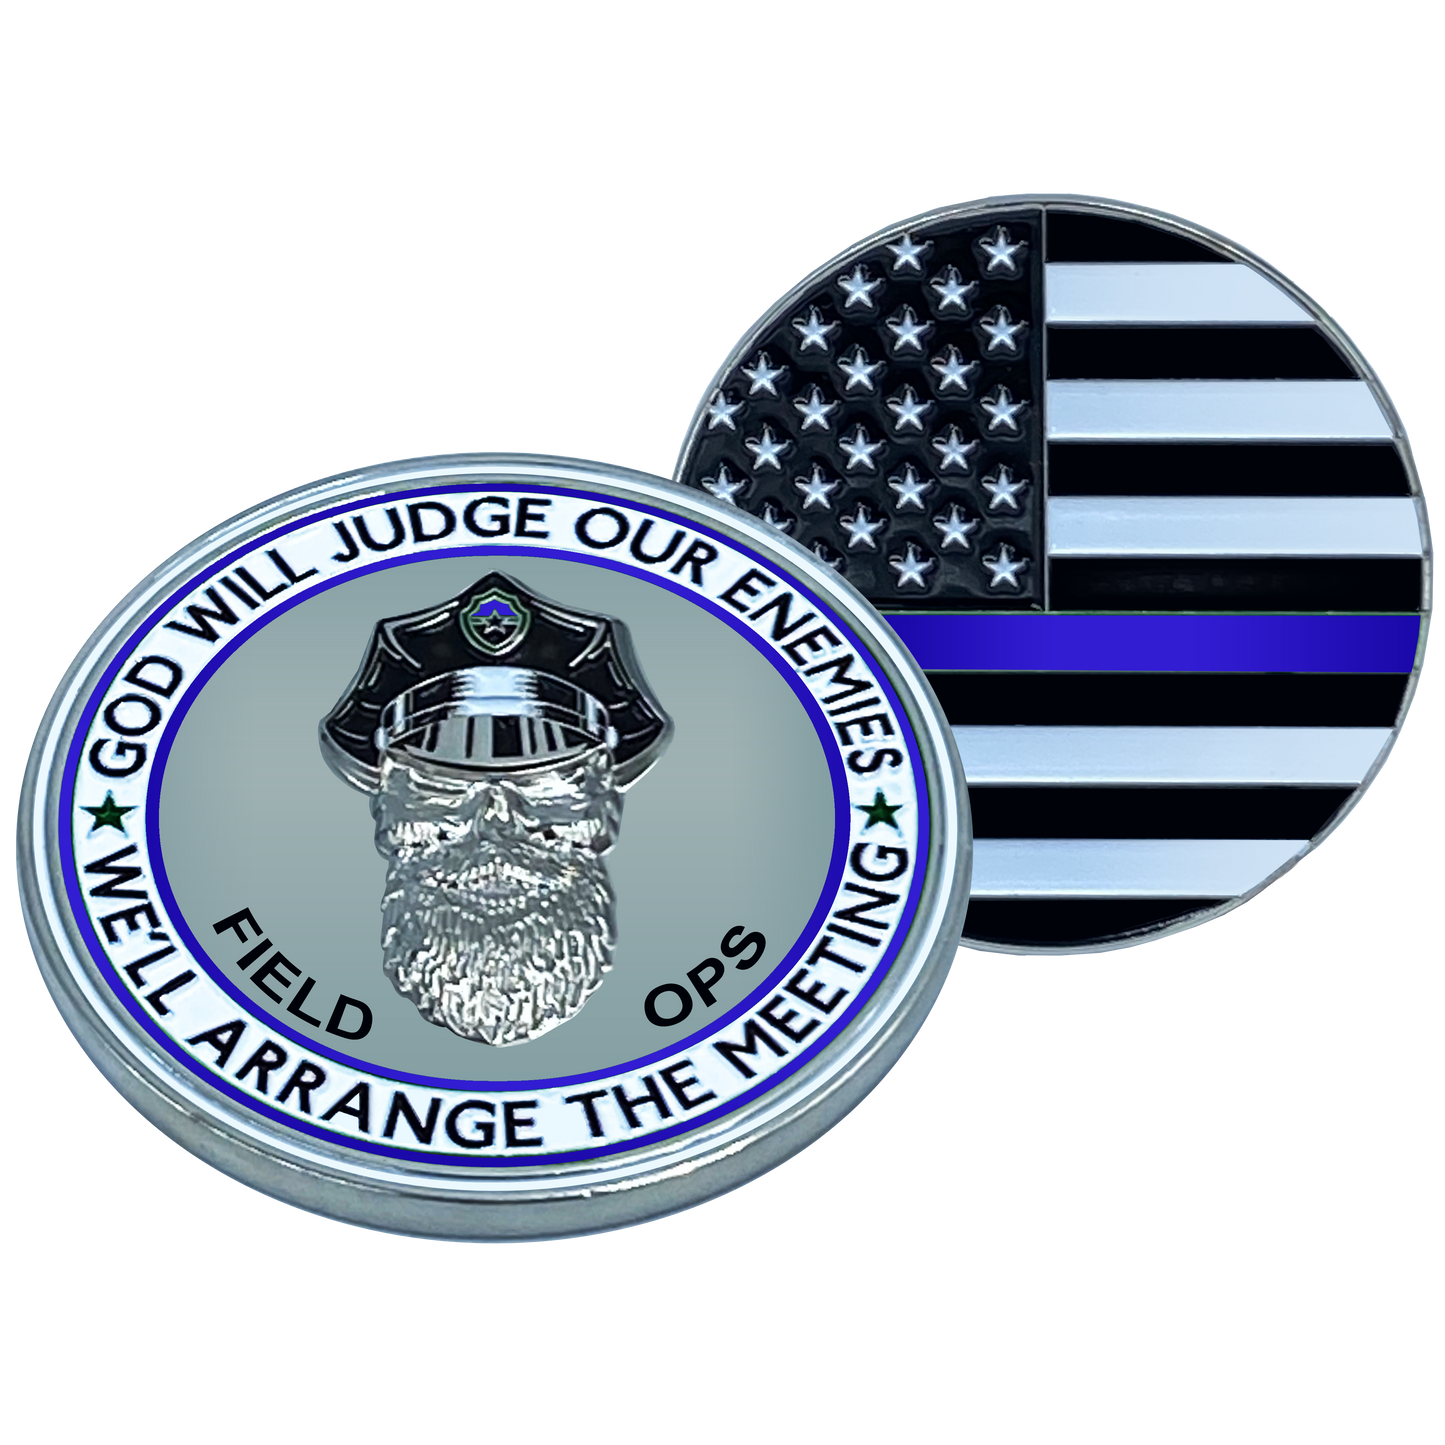 EL1-016 Thin Blue Line CBP FIELD OPERATIONS God Will Judge BEARD GANG SKULL Challenge Coin Field Ops Back the Blue